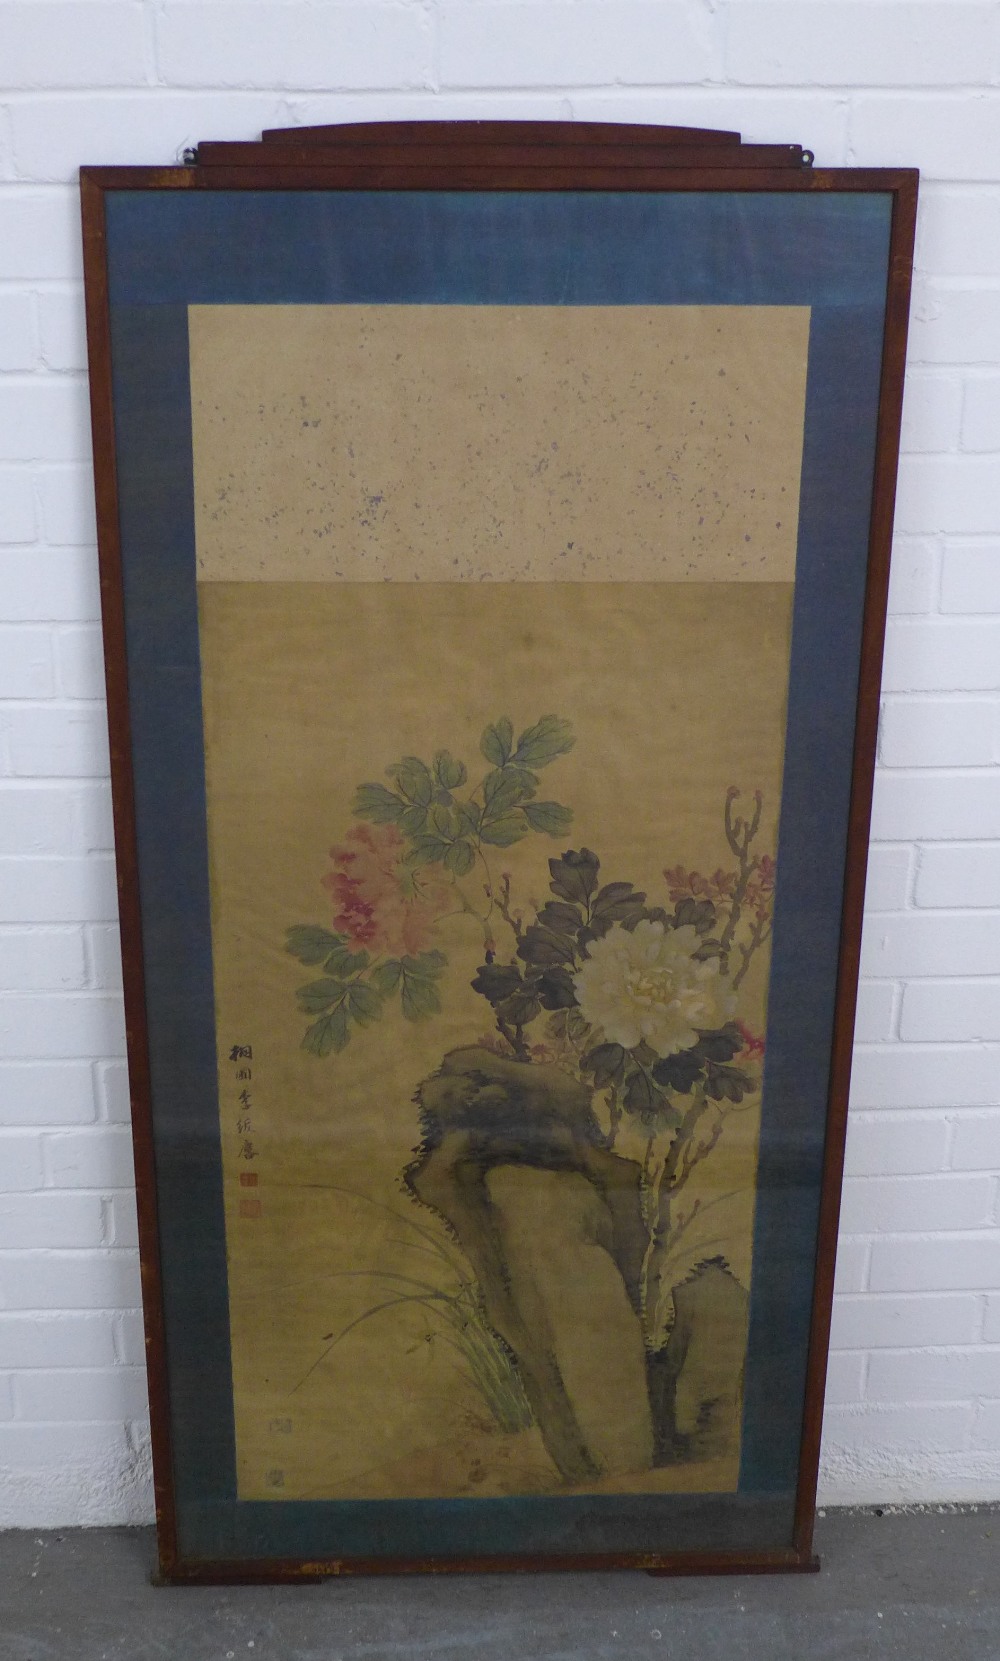 LI FULIN (QING DYNASTY 1644 - 1911) watercolour of mixed flowers, signed with character marks, fram